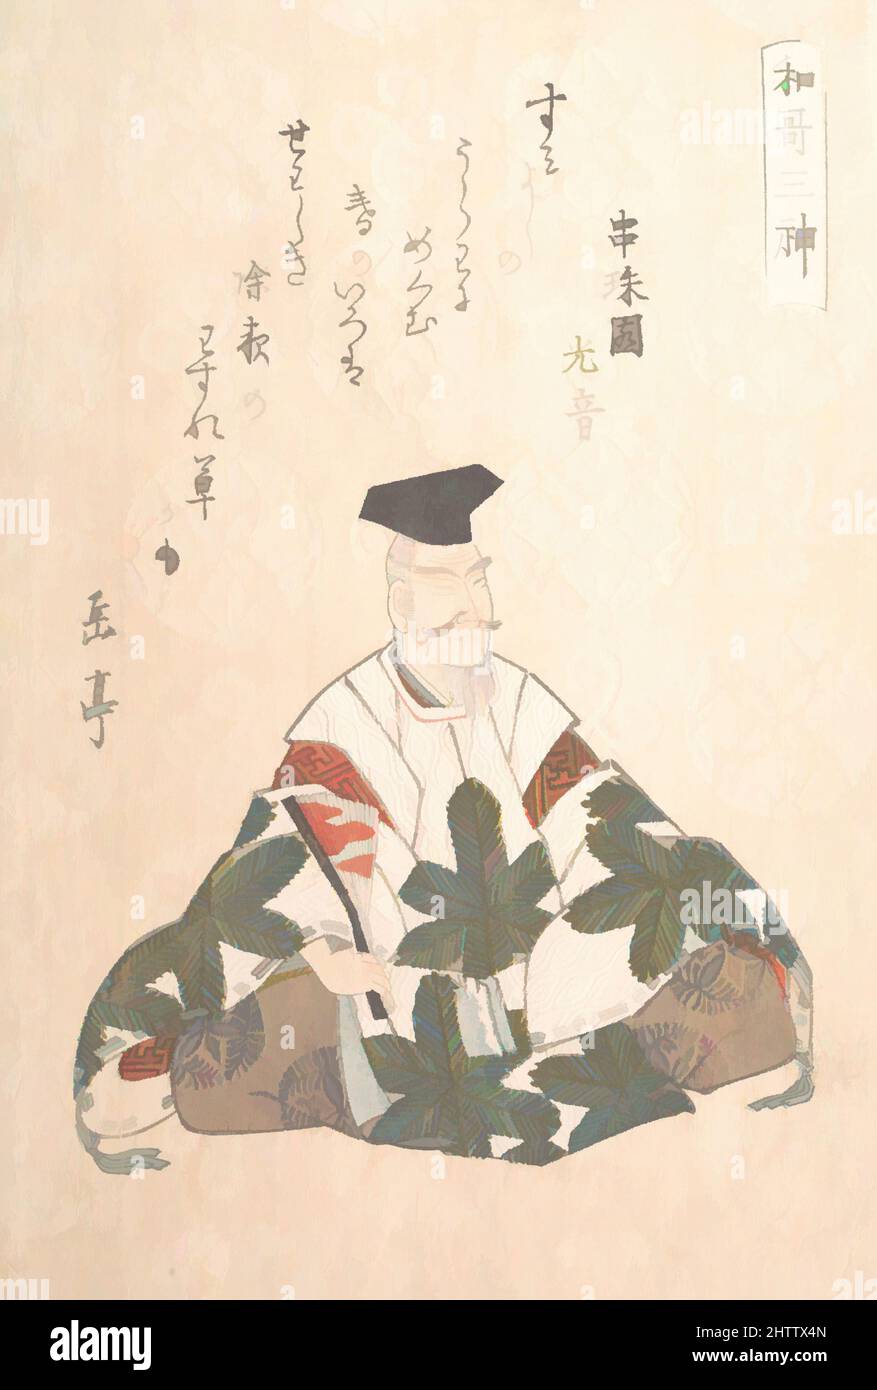 Art inspired by 『和歌三神』山部赤人, Edo period (1615–1868), ca. 1820s, Japan, Polychrome woodblock print (surimono); ink and color on paper, 8 x 5 1/4 in. (20.3 x 13.3 cm), Prints, Yashima Gakutei (Japanese, 1786?–1868), Surimono are privately published woodblock prints, usually commissioned, Classic works modernized by Artotop with a splash of modernity. Shapes, color and value, eye-catching visual impact on art. Emotions through freedom of artworks in a contemporary way. A timeless message pursuing a wildly creative new direction. Artists turning to the digital medium and creating the Artotop NFT Stock Photo